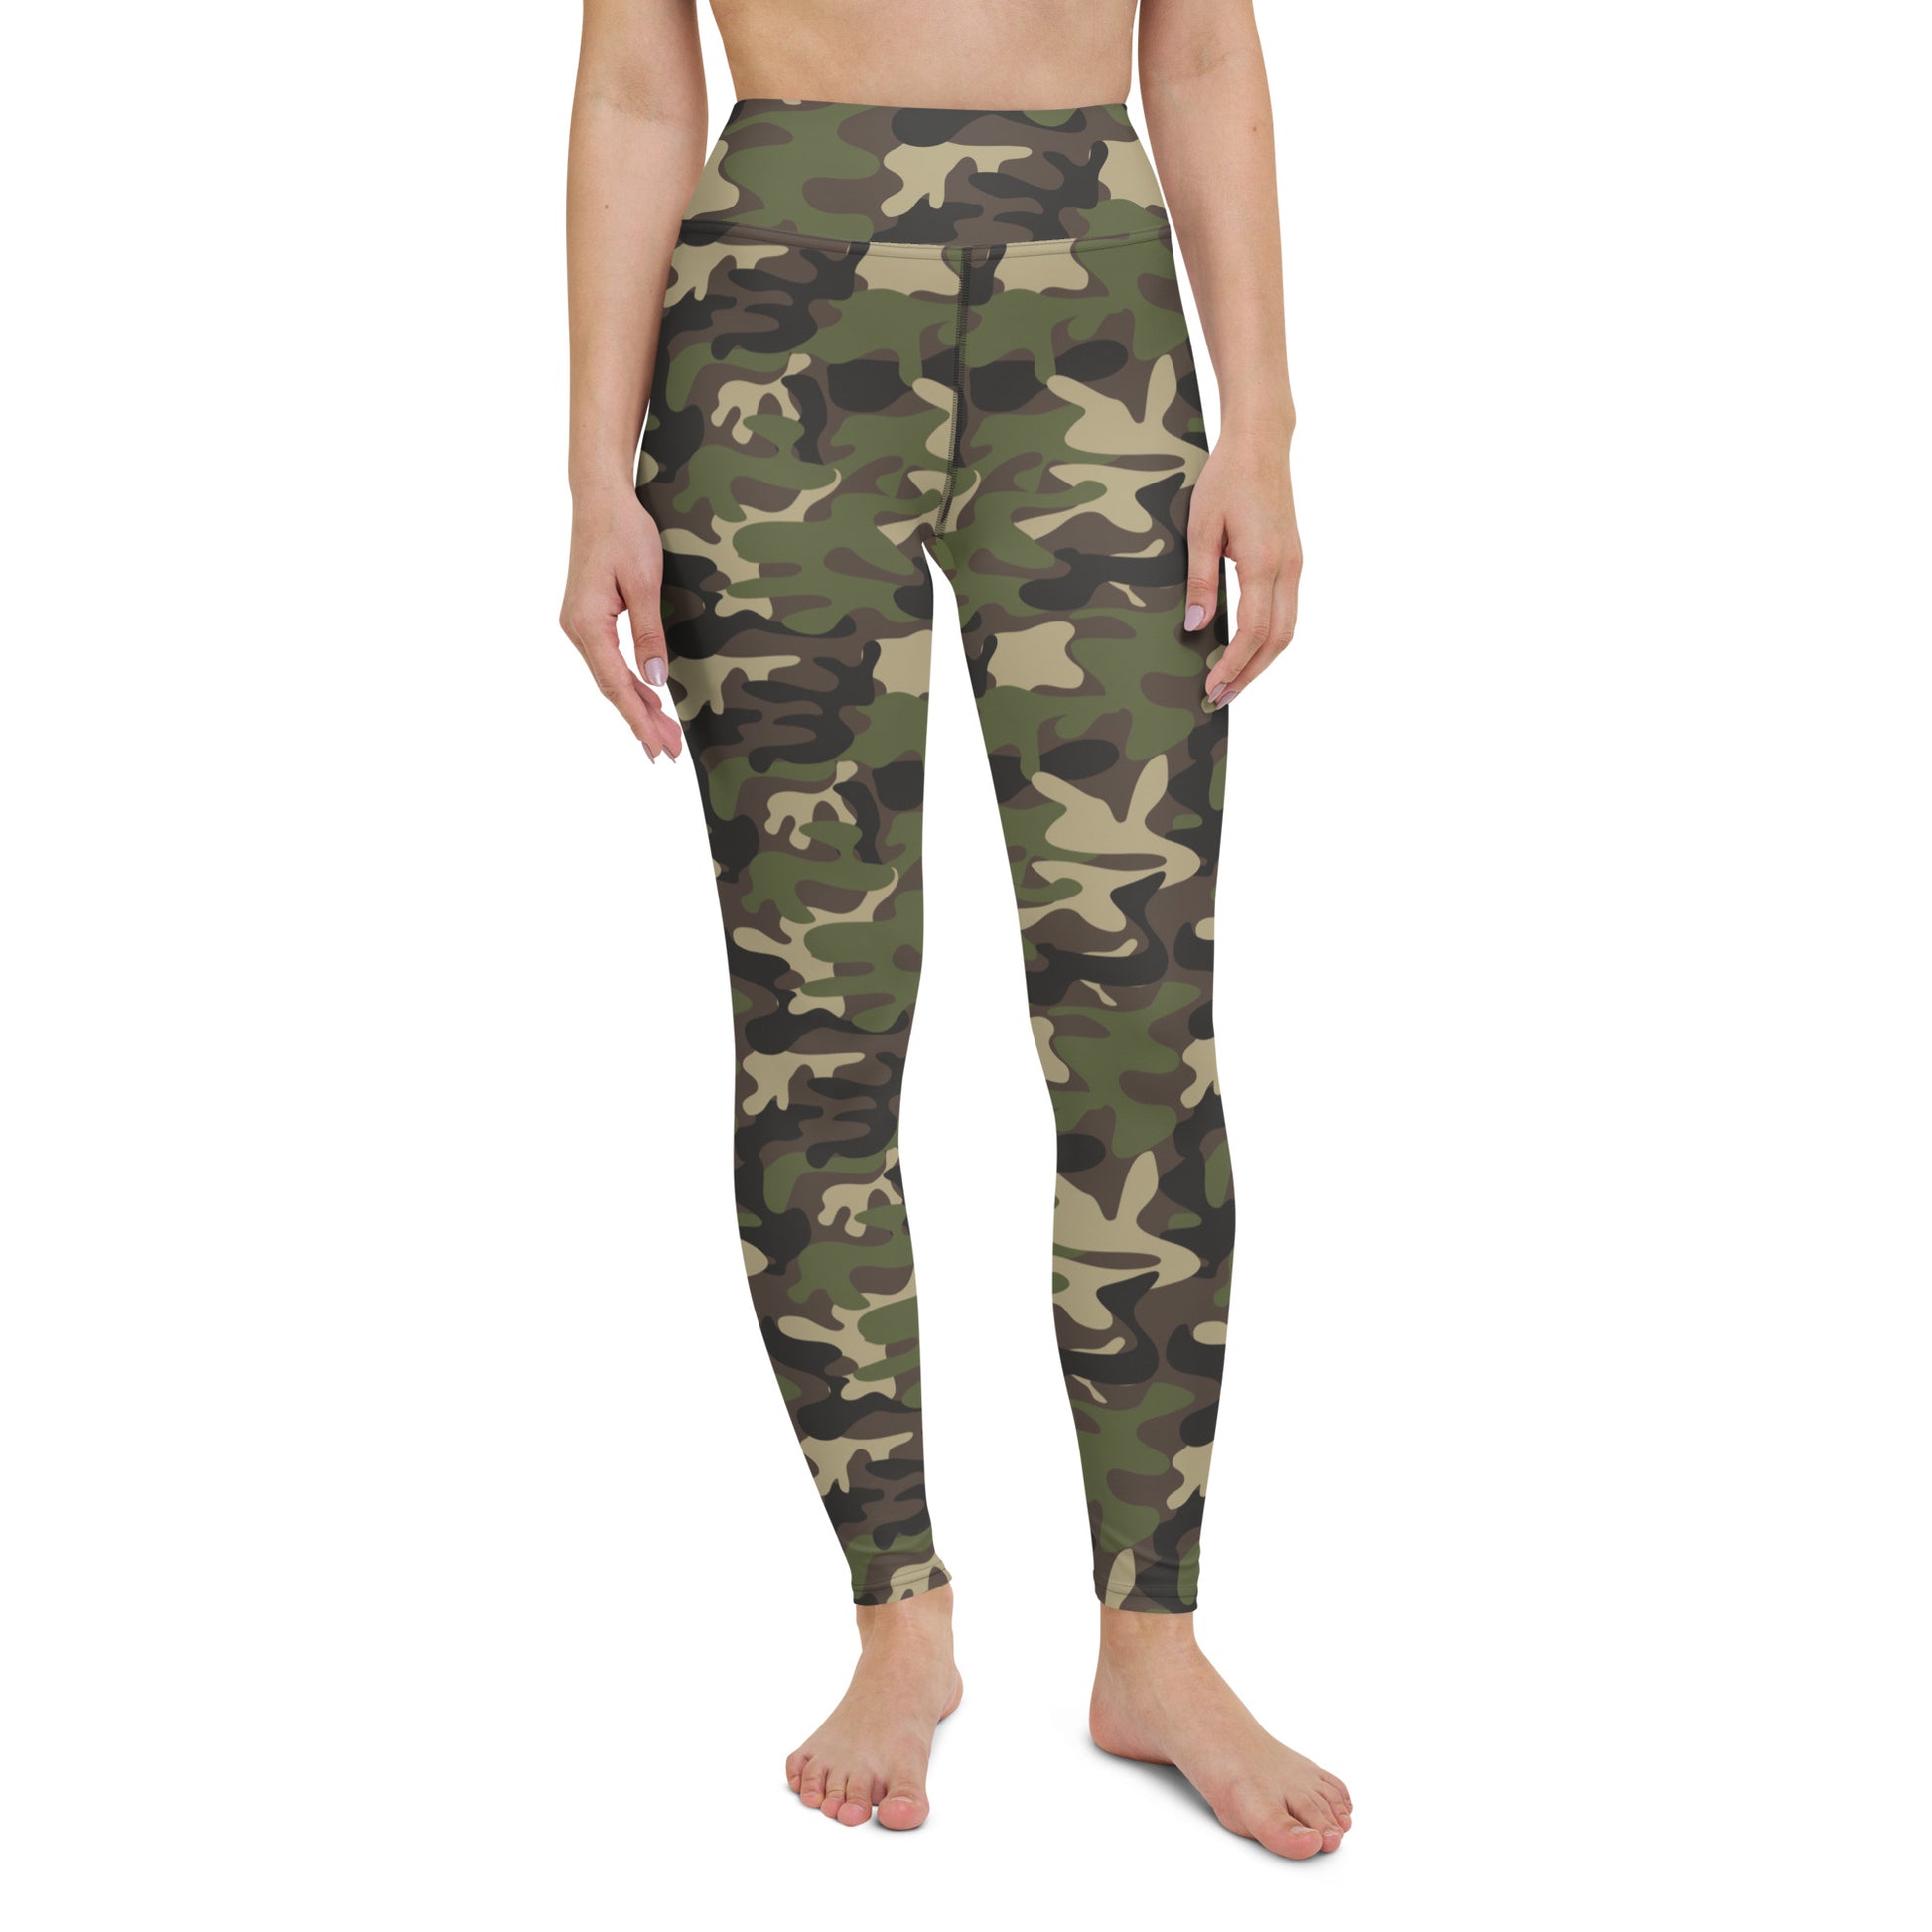 Green Camo Yoga Leggings Women, Army Camouflage High Waisted Pants Cute Printed Workout Running Gym Designer Tights Starcove Fashion